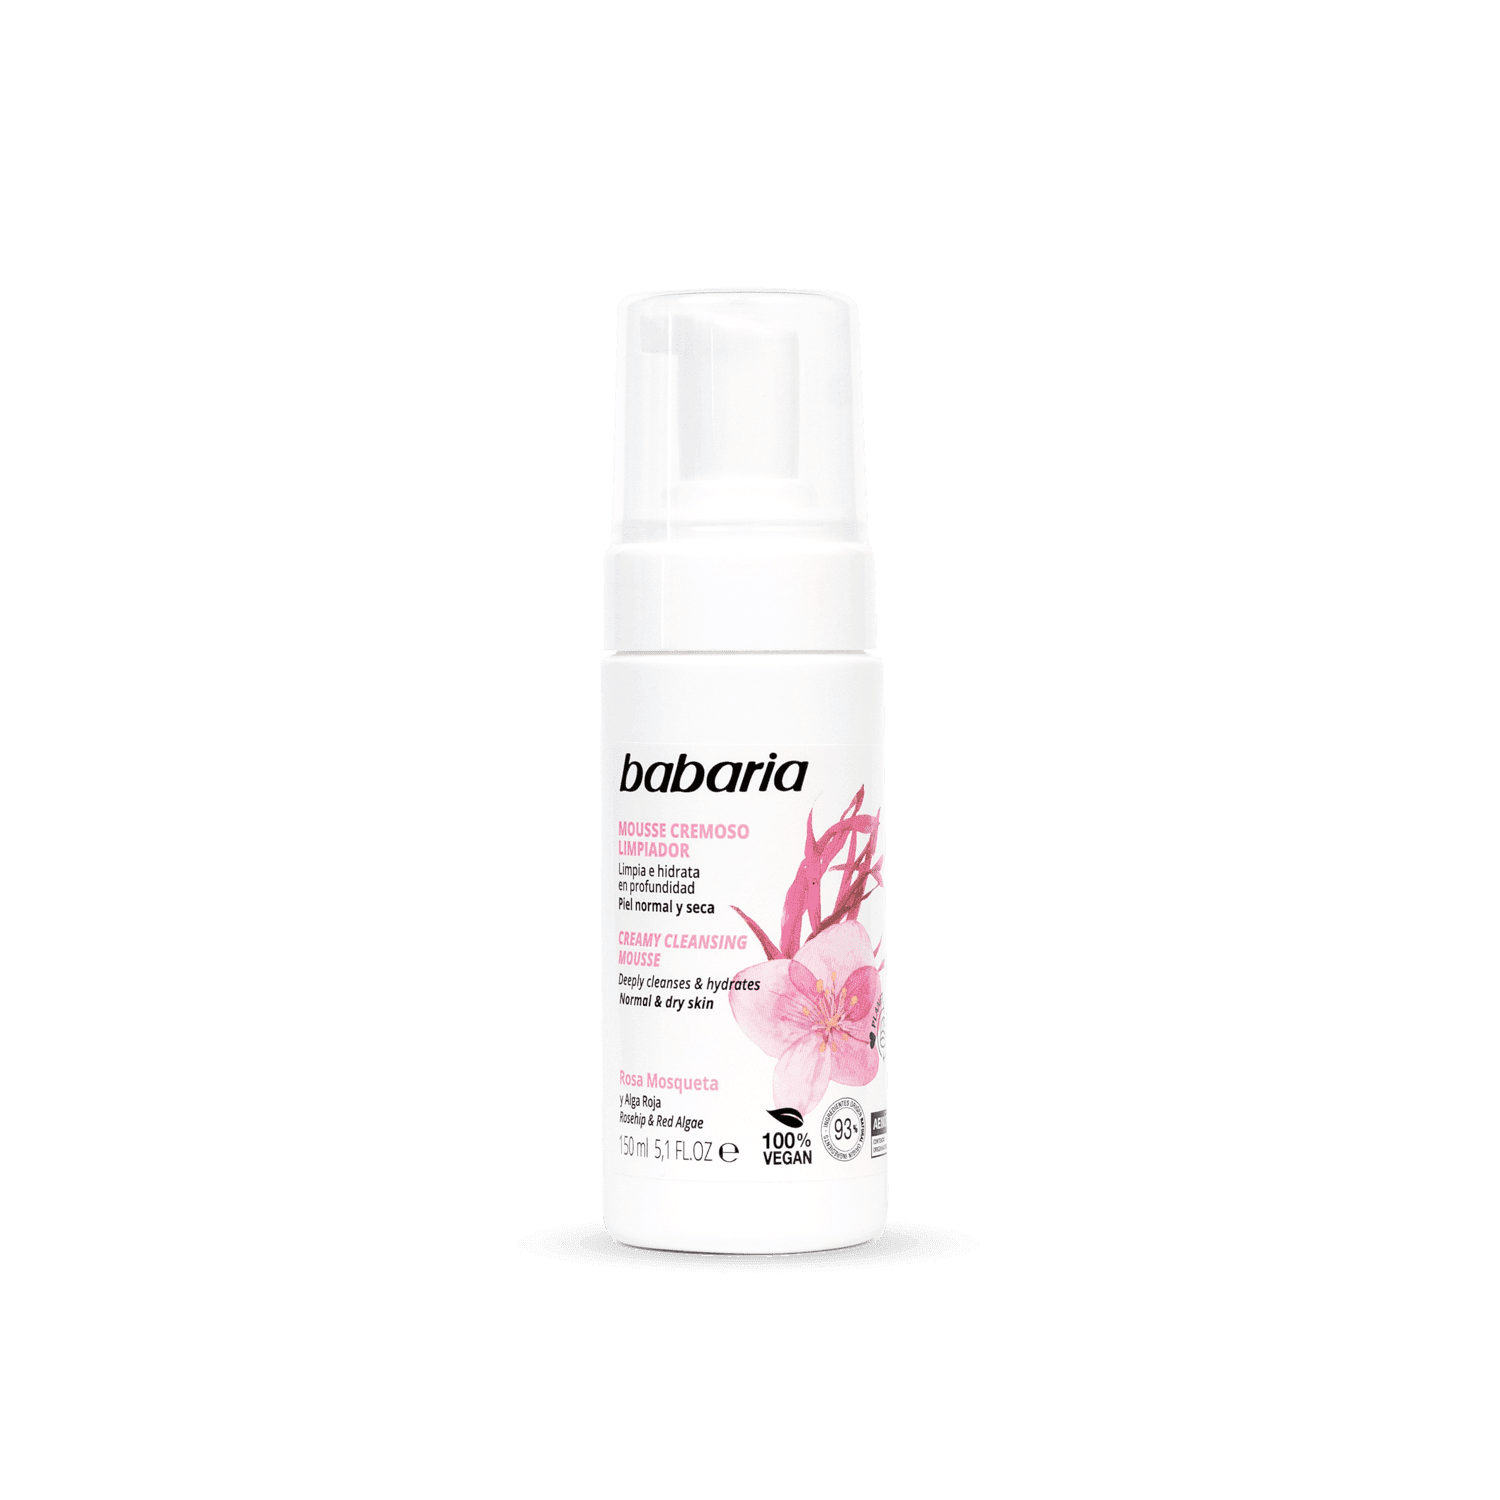 Babaria Face Cleaner Mousse 150 ml - Mrayti Store